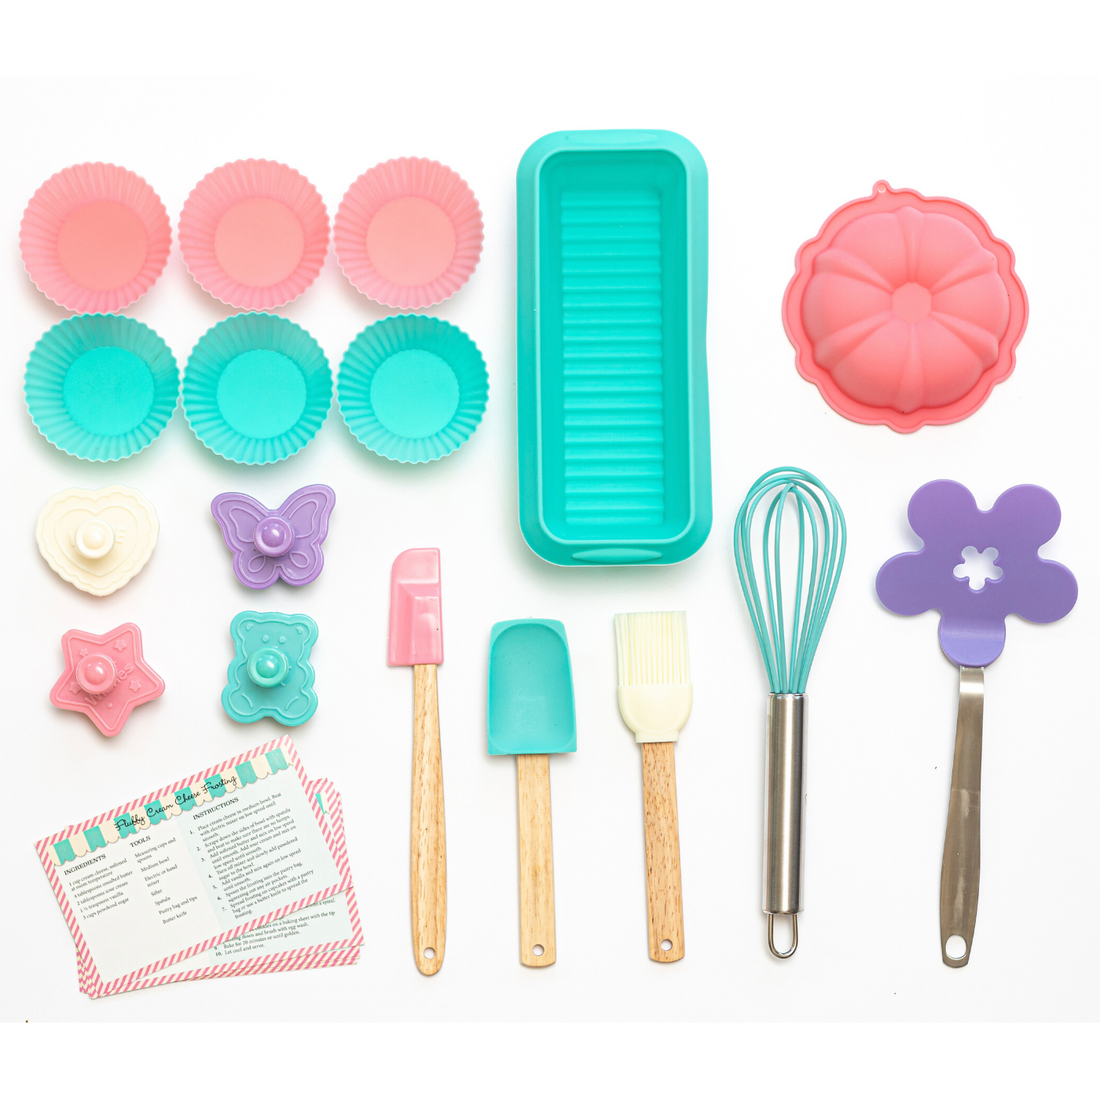 Out of box images of item contained within Bake Shoppe Deluxe Baking Set. 1 silicone fluted cake mold, 1 silicone loaf pan, 6 silicone baking cups, 4 cookie stamps, 1 silicone spatula, 1 silicone  pastry brush, 1 silicone mixing spoon, 1 silicone whisk, 1 flower-shaped cookie flipper and recipes.